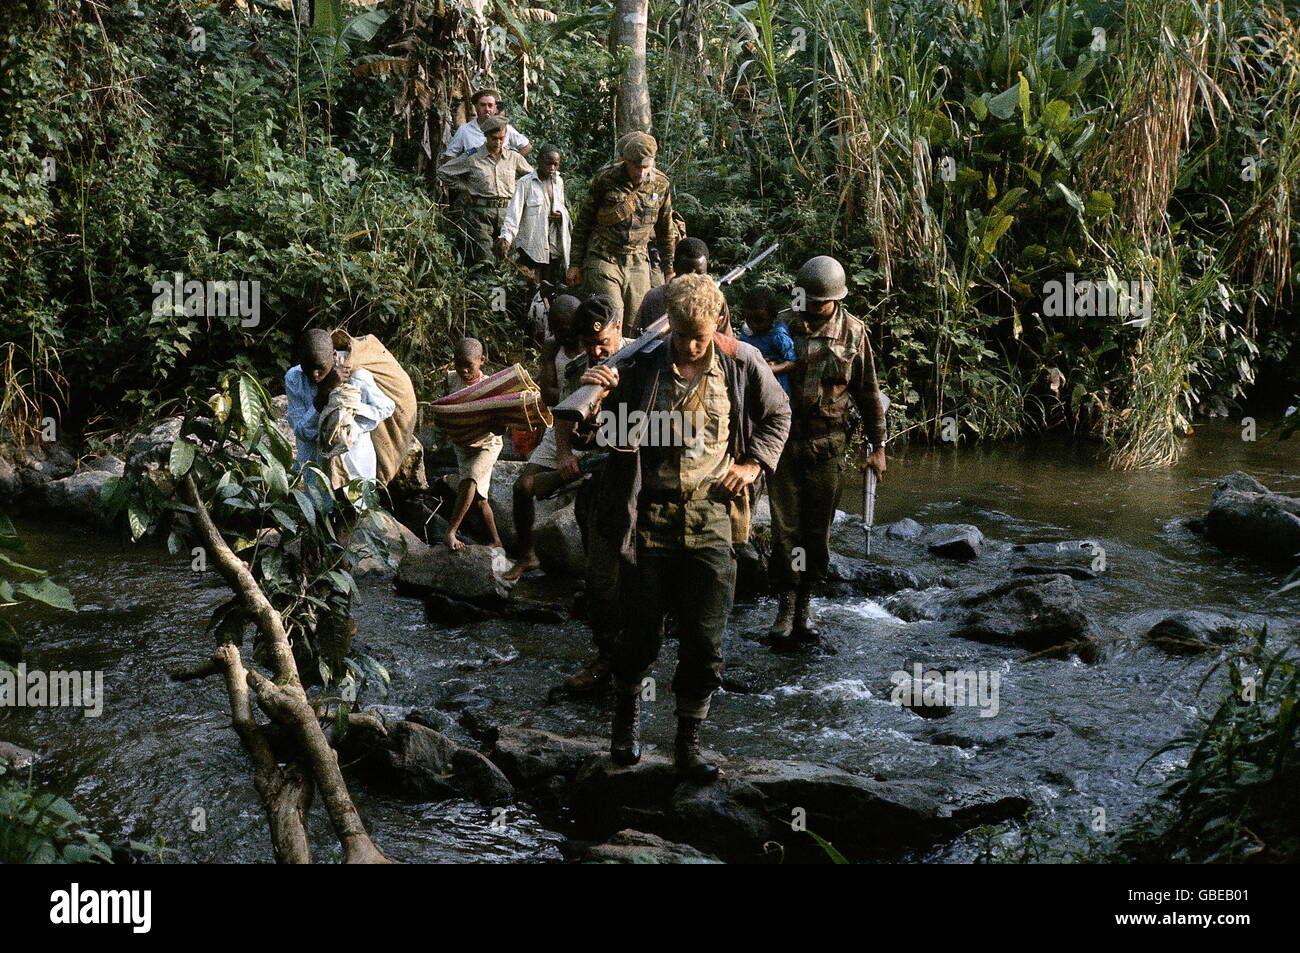 geography / travel, Congo, Simba uprising 1964 - 1965, mercenaries and native bearers marchin through the jungle, December 1964, Congo crisis, Civil War, Africa, military, march, creek, crossing,  20th century, historic, historical, people, male, man, men, 1960s, woman, women, female, Additional-Rights-Clearences-Not Available Stock Photo